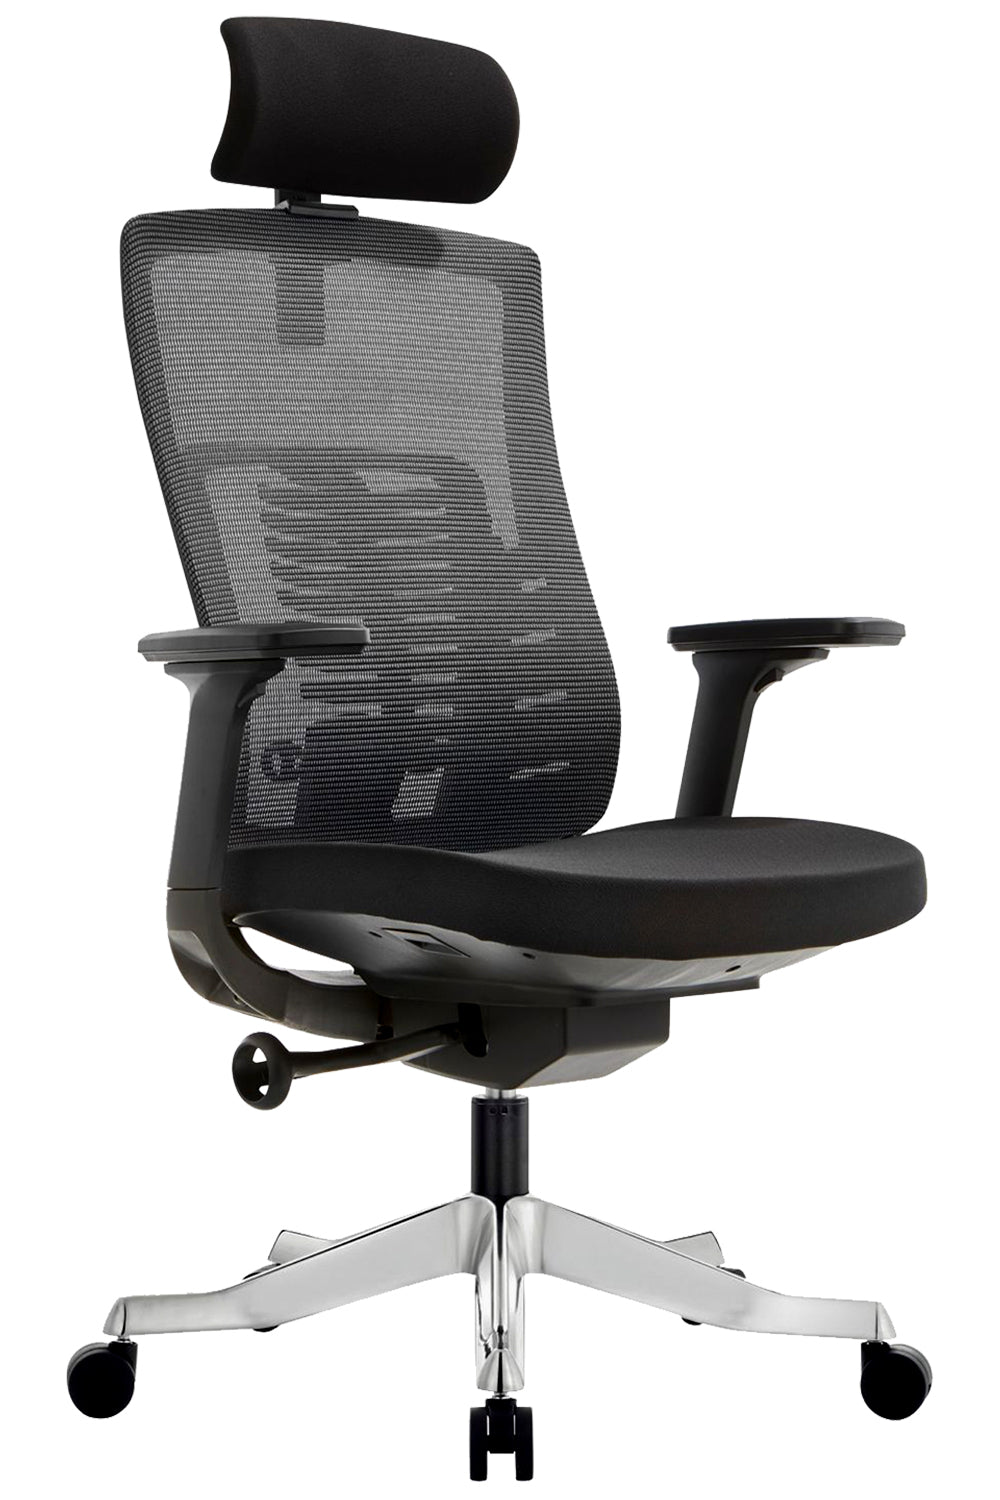 Apollo High Back 3D Workstation Swivel Chair with Cushion Seat And Aluminum die cast Base  - Black